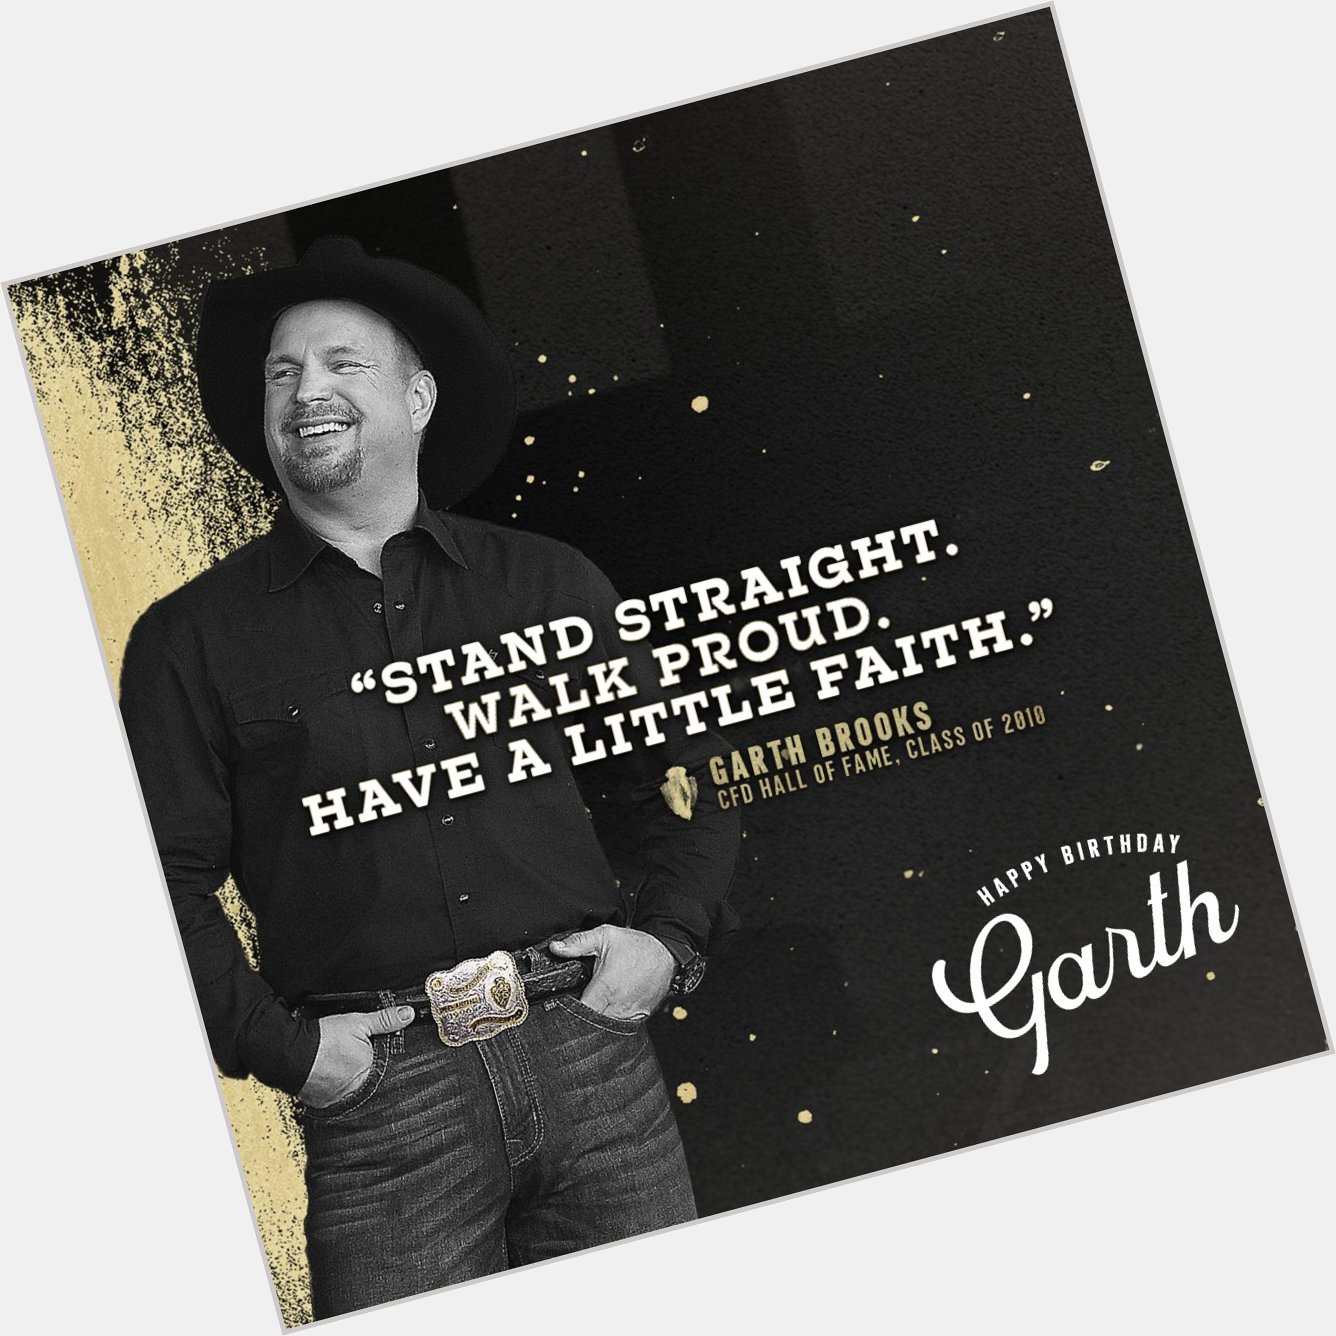 Happy Birthday Garth Brooks! Do you remember what year(s) he\s performed at CFD? 